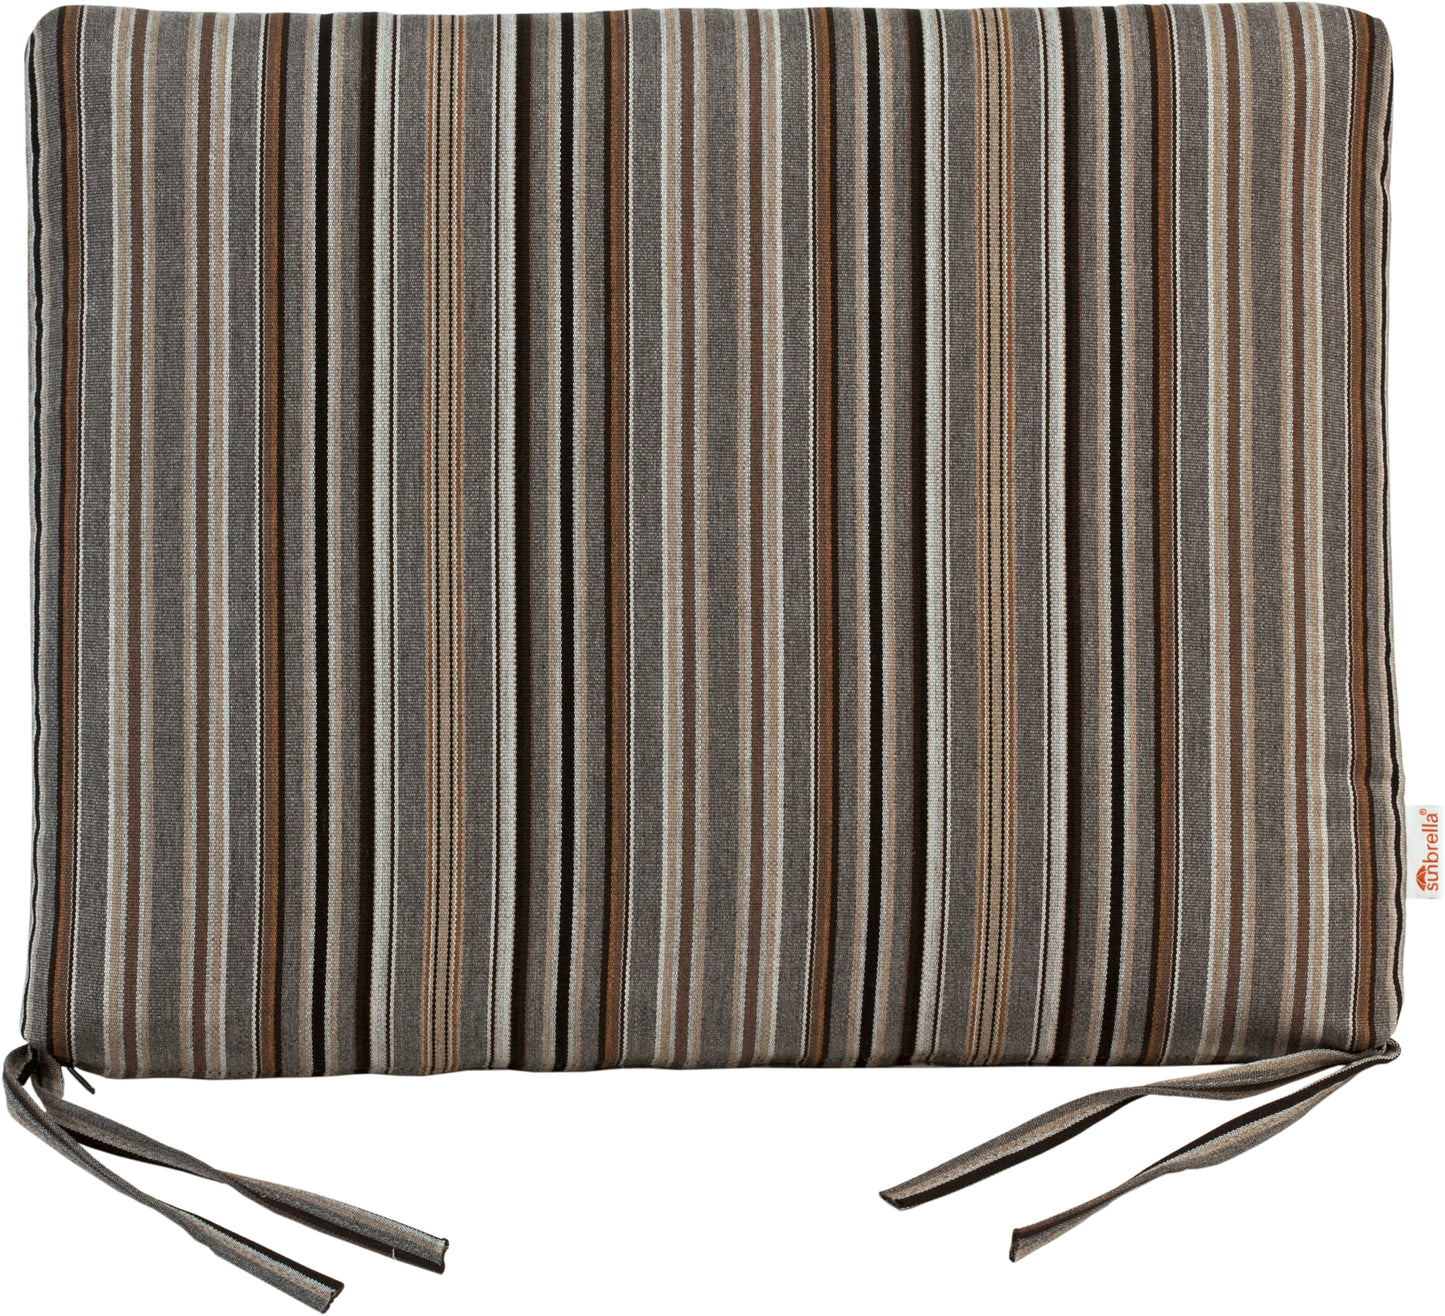 LuxCraft 2' Sunbrella Outdoor Chair Cushion - LEAD TIME TO SHIP 10 to 12 BUSINESS DAYS